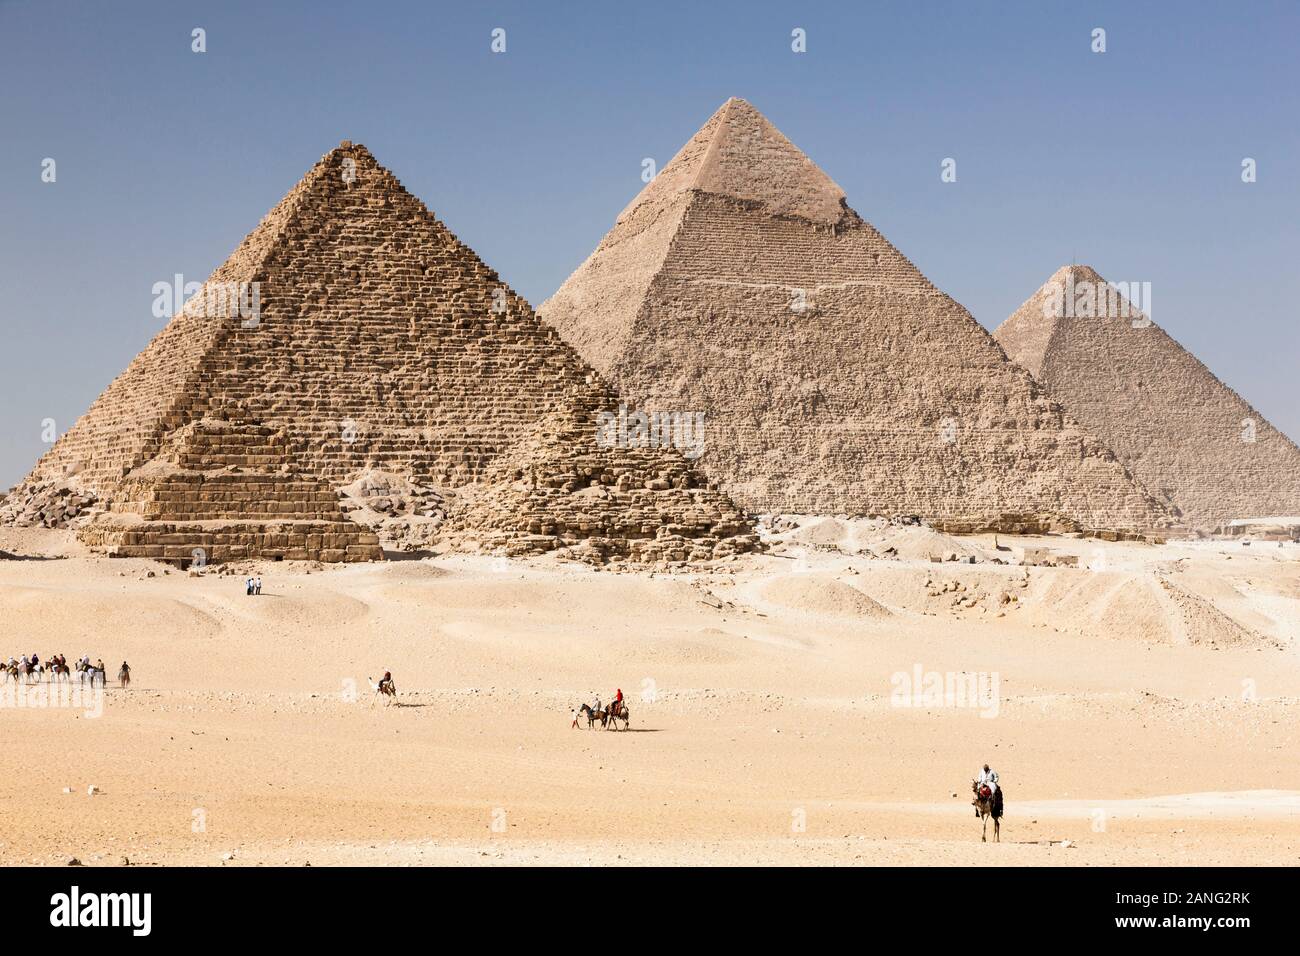 Great pyramids of Giza, the three Great pyramids, view from desert, giza, cairo, Egypt, North Africa, Africa Stock Photo